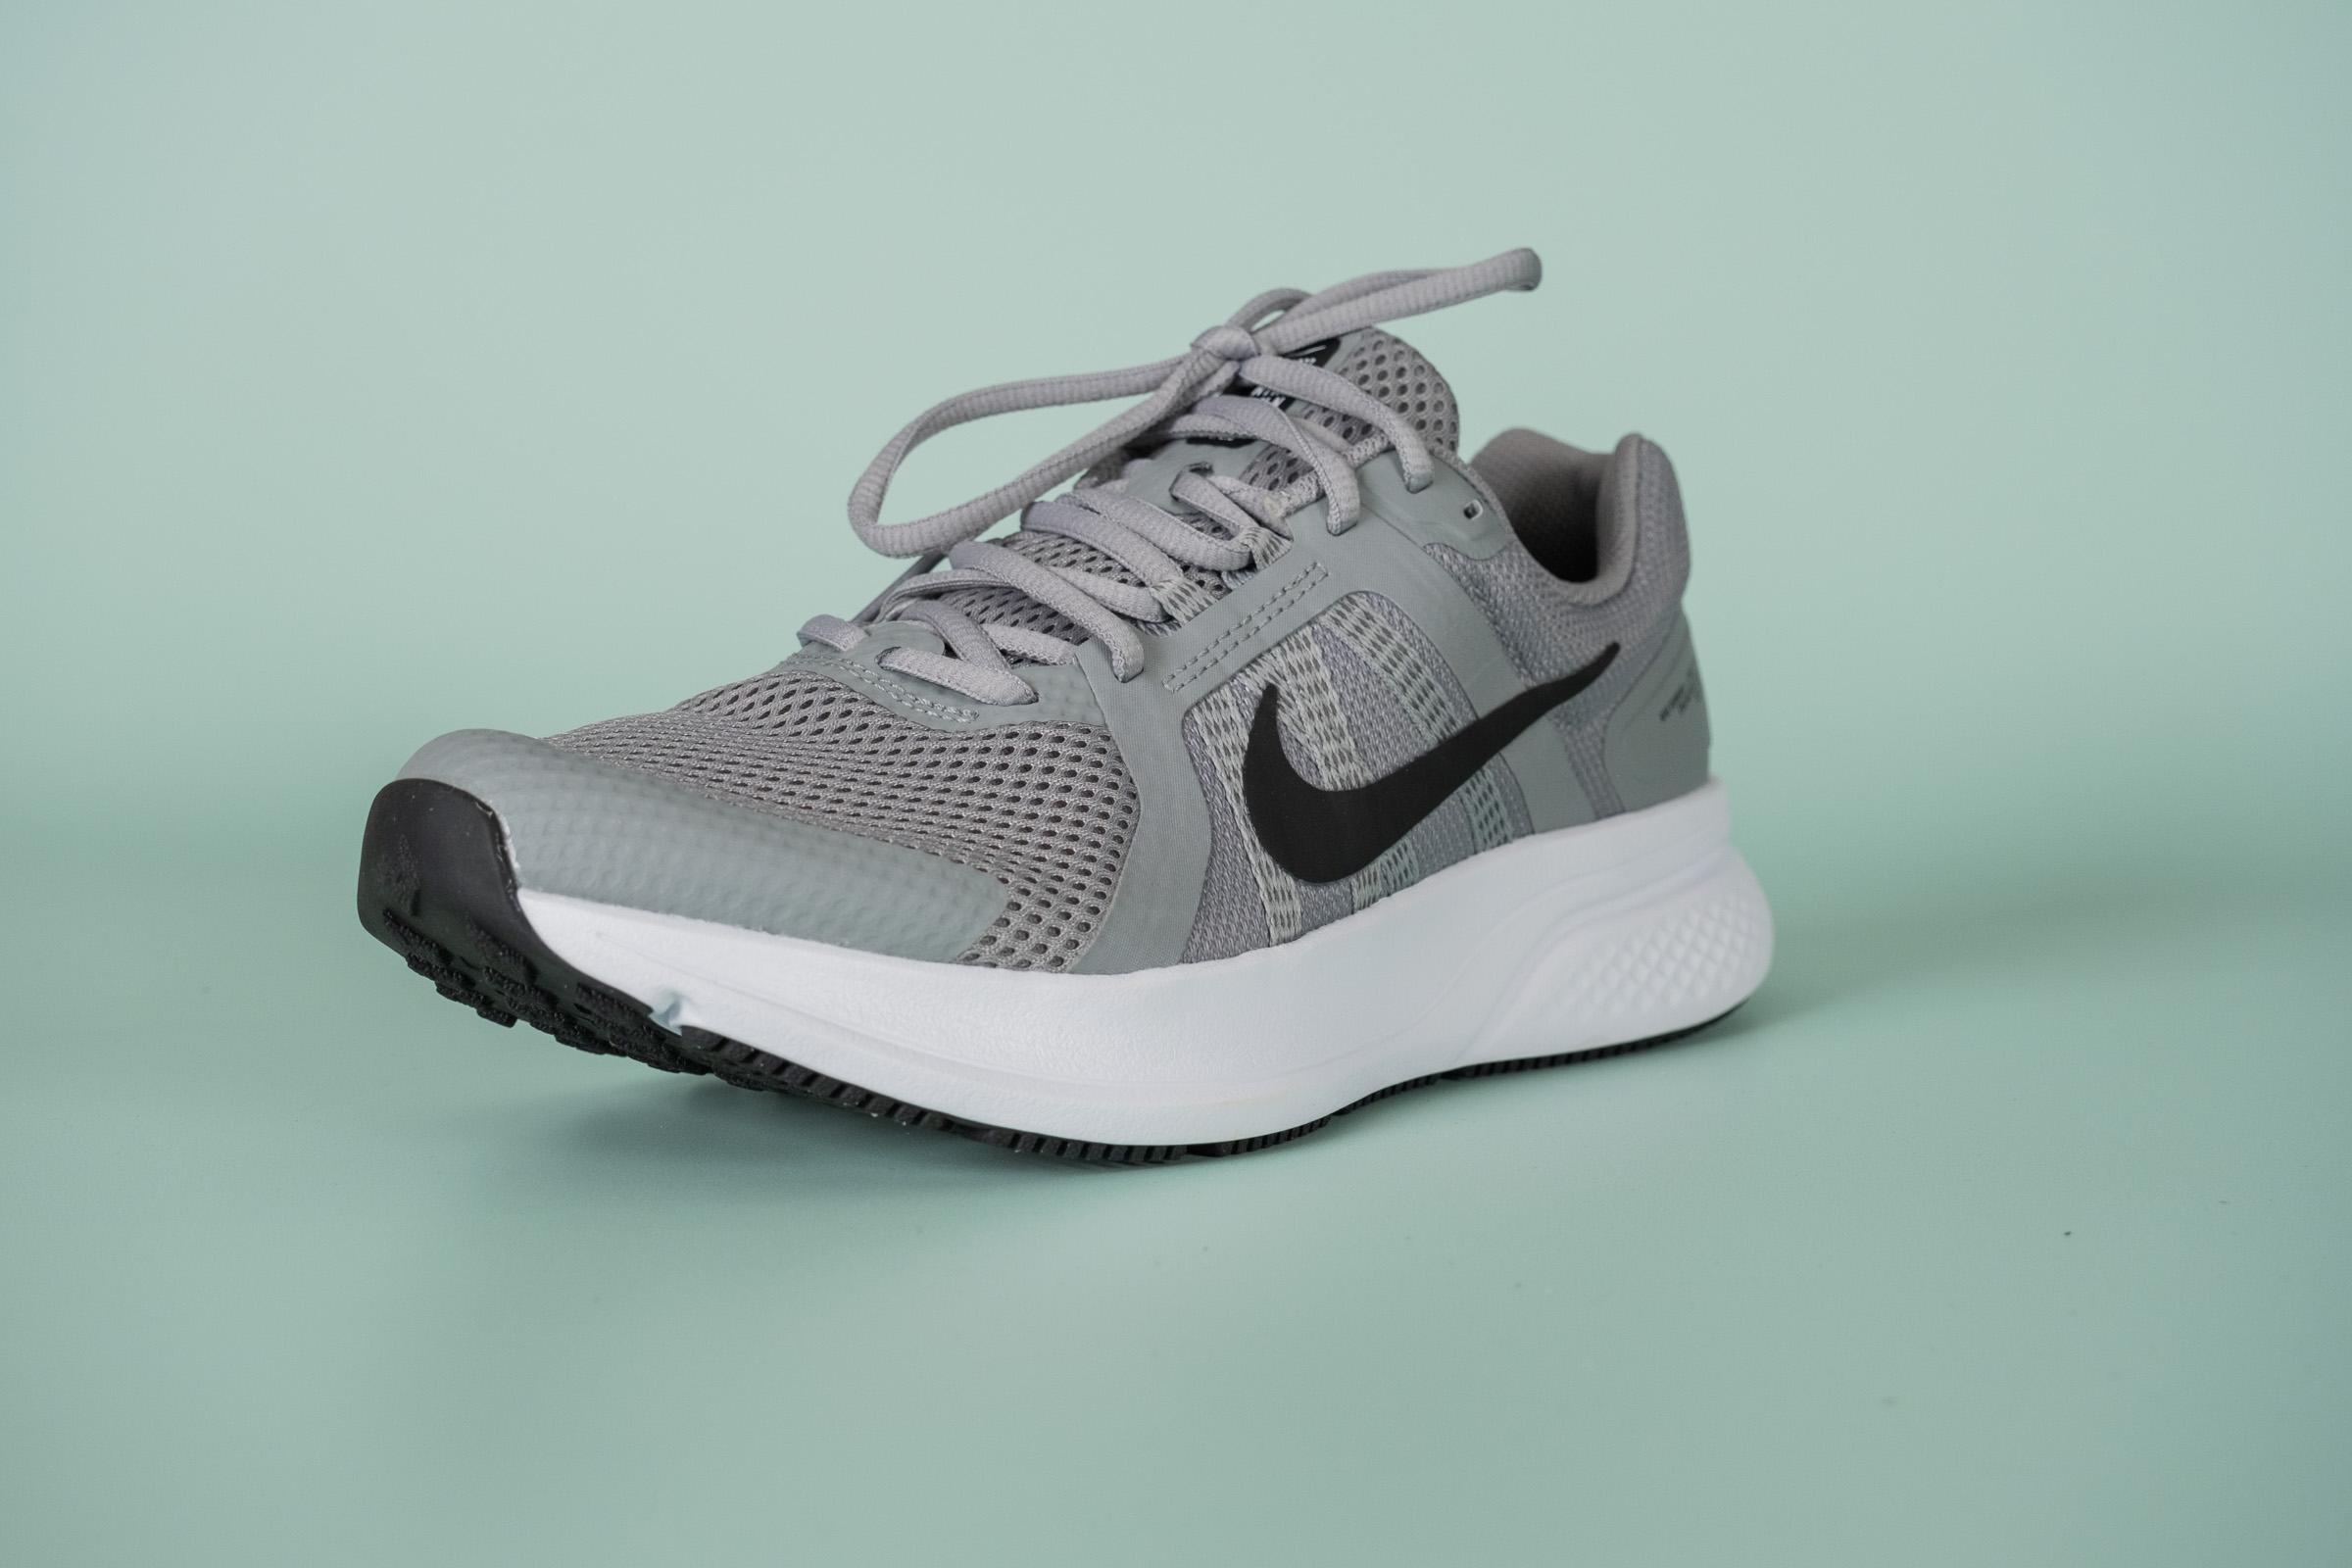 Nike Run Swift 2 Review, Facts, Comparison |